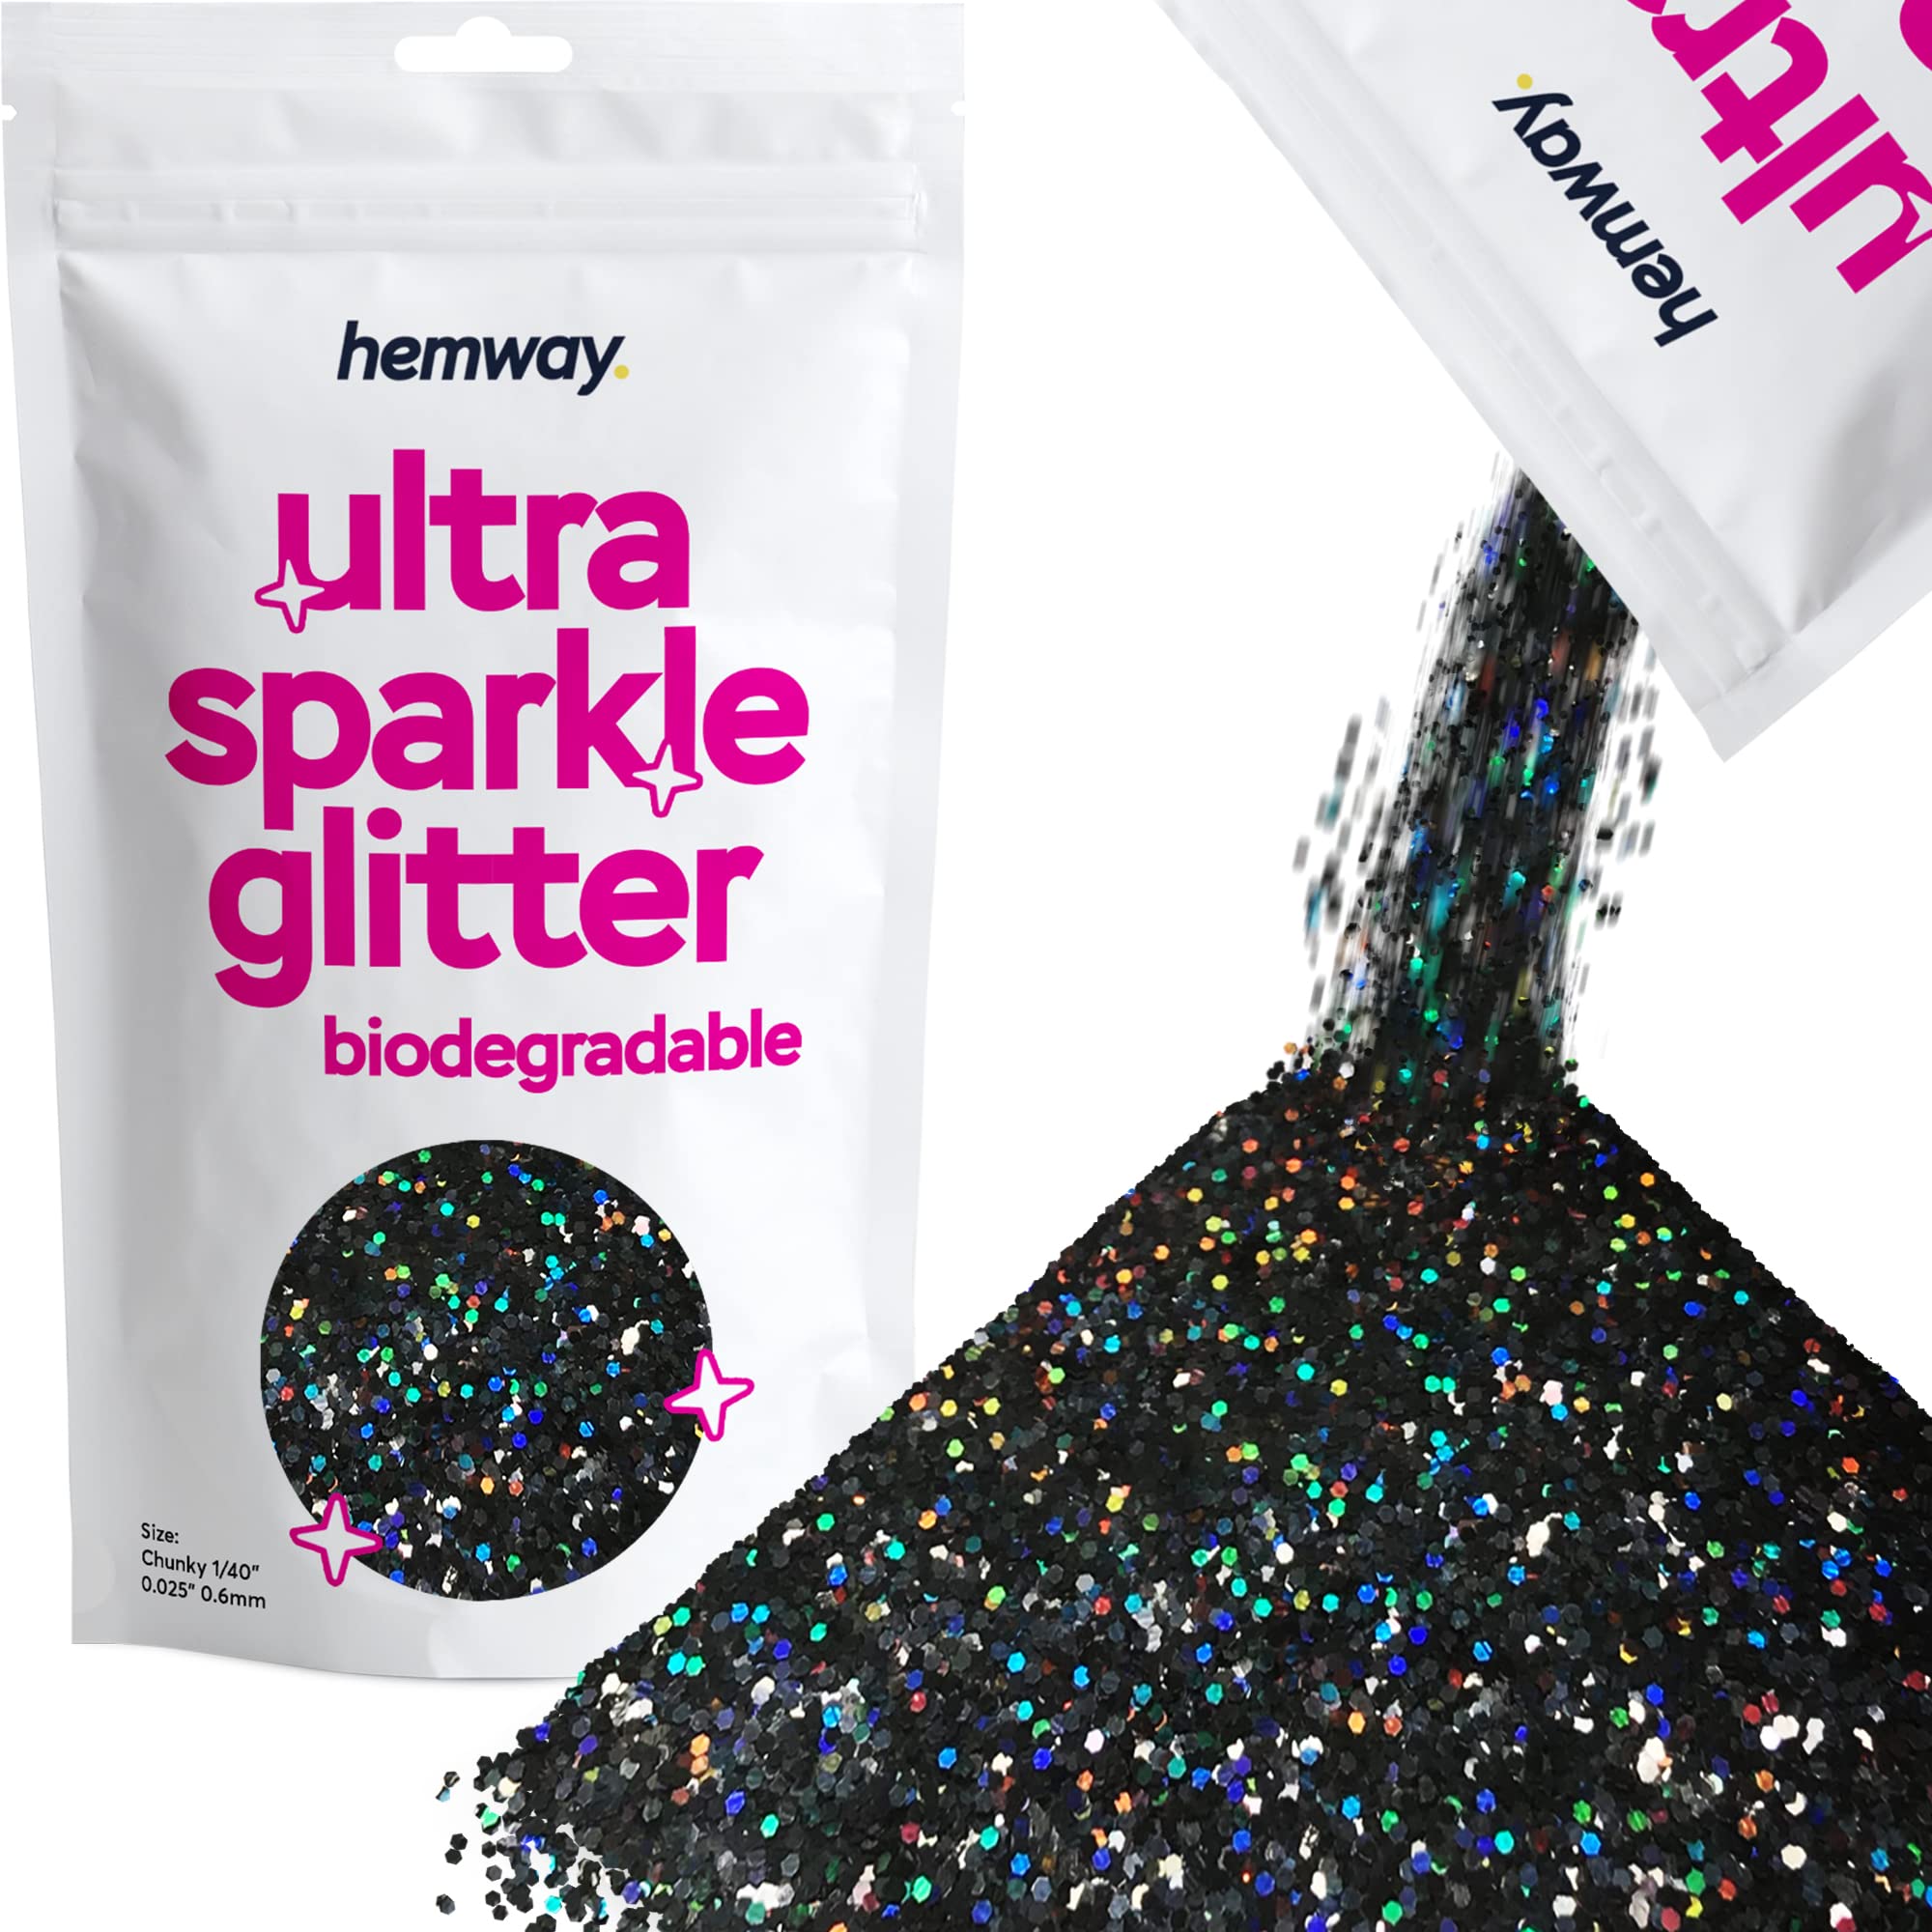  Holographic Chunky Glitter, 100g Black Cosmetic Craft